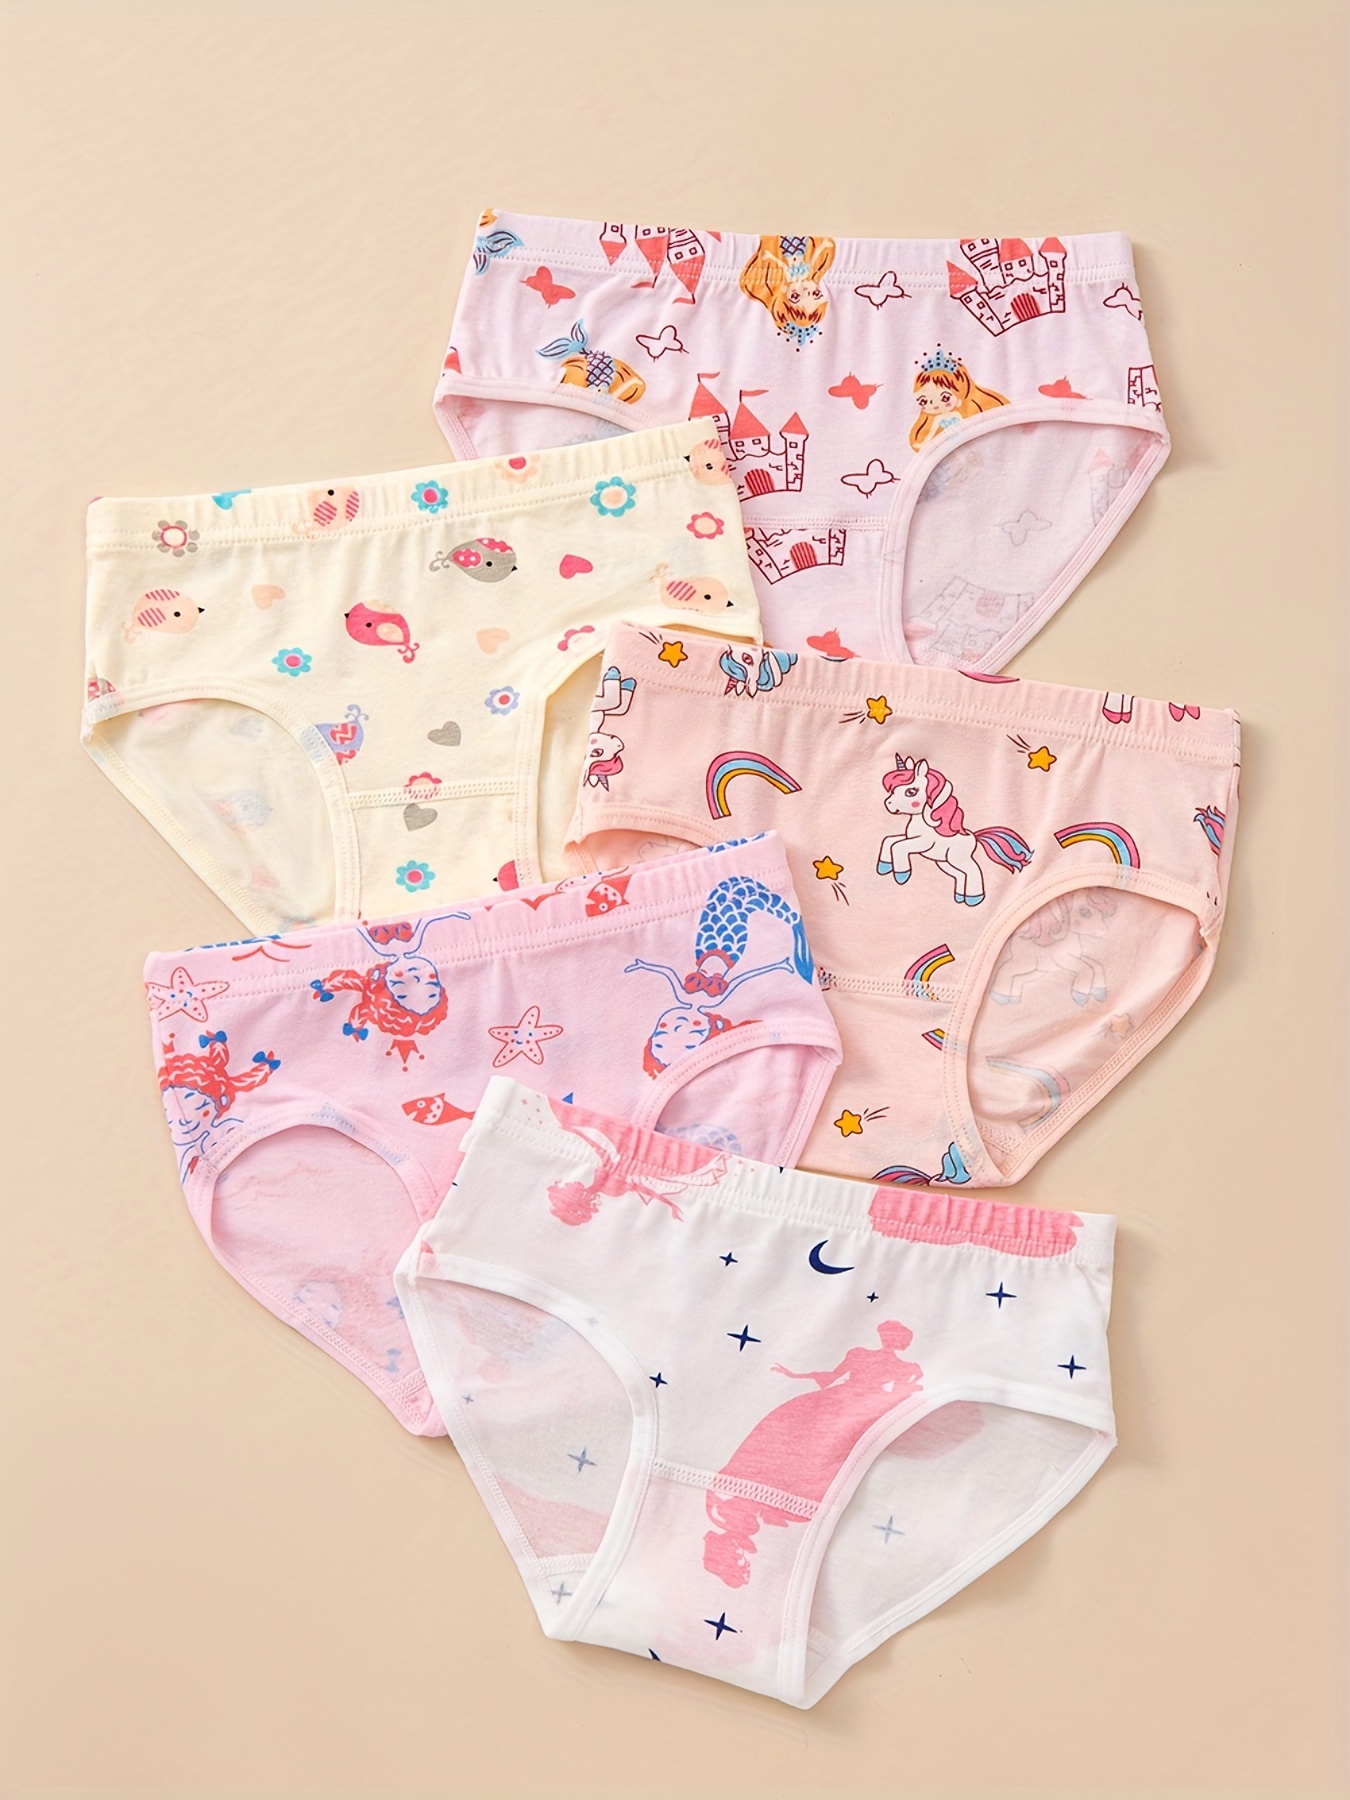 Girl's Cotton Triangle Panties, Cute Graphic Elastic Waist Underwear, Comfy  Breathable Soft Kids Clothes